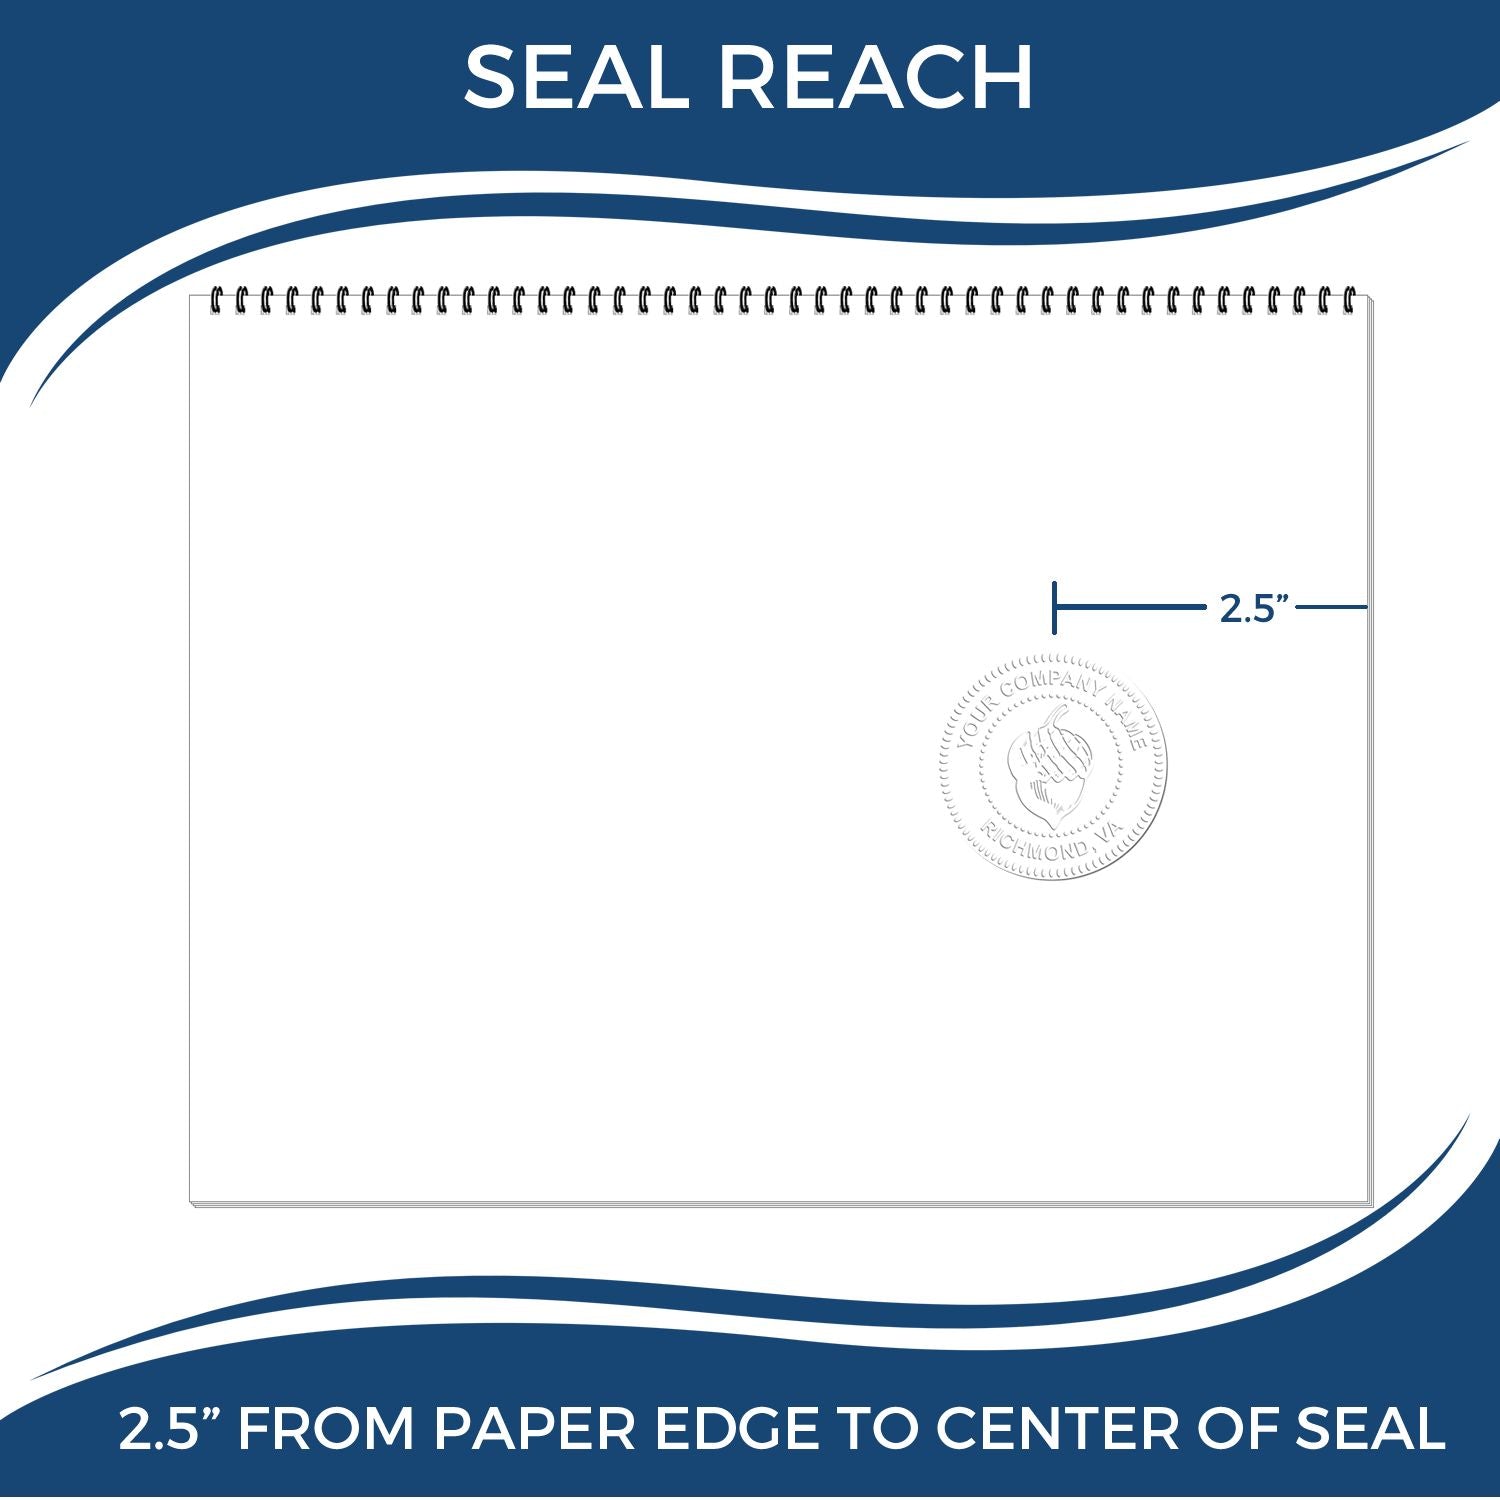 An infographic showing the seal reach which is represented by a ruler and a miniature seal image of the Long Reach Montana Land Surveyor Seal